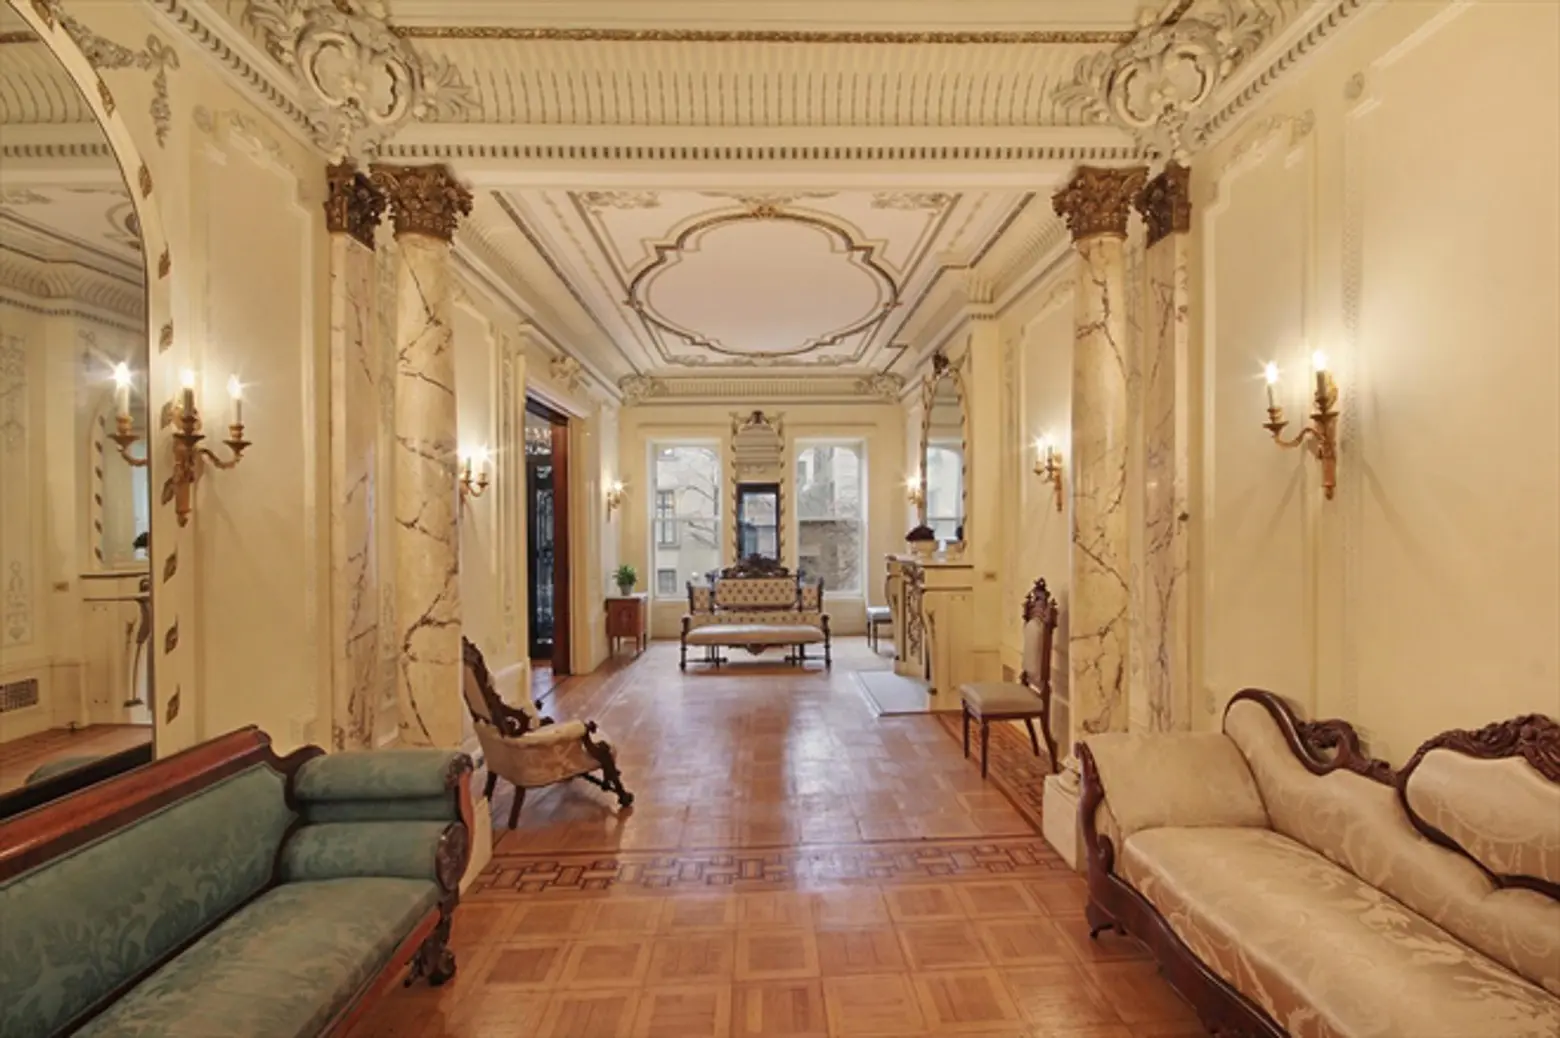 Beautiful Upper East Side Fairytale Mansion Now $2M Less